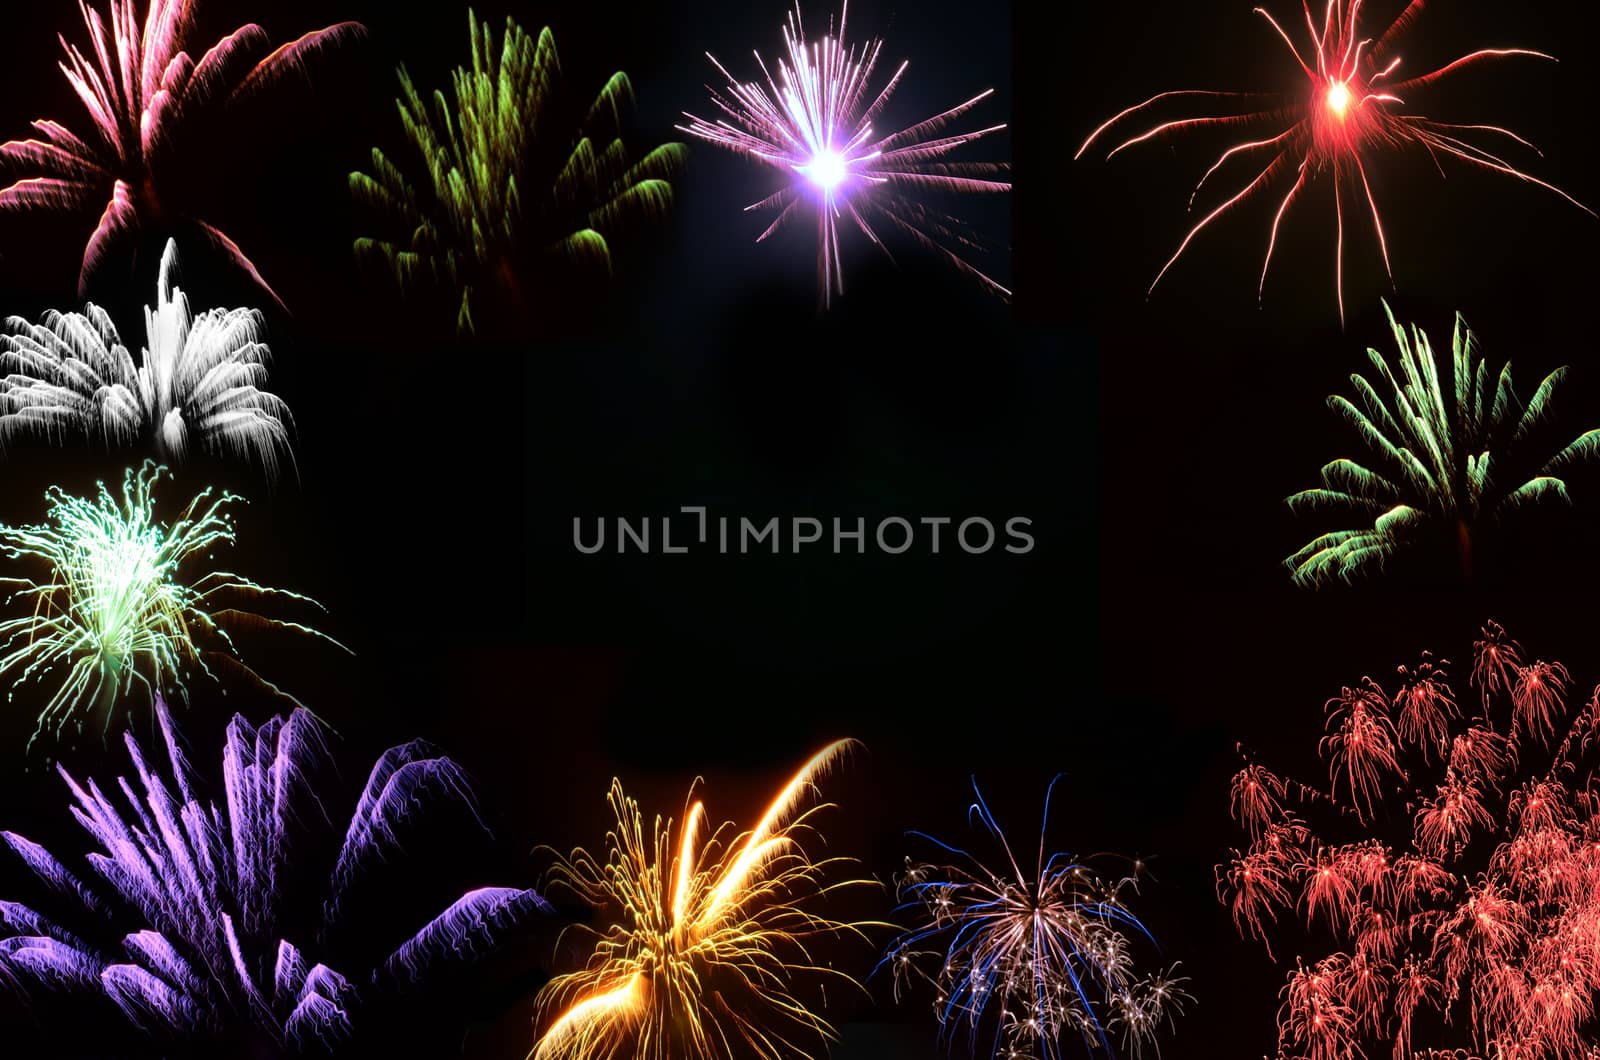 Fireworks frame on a black background ready to add your text

